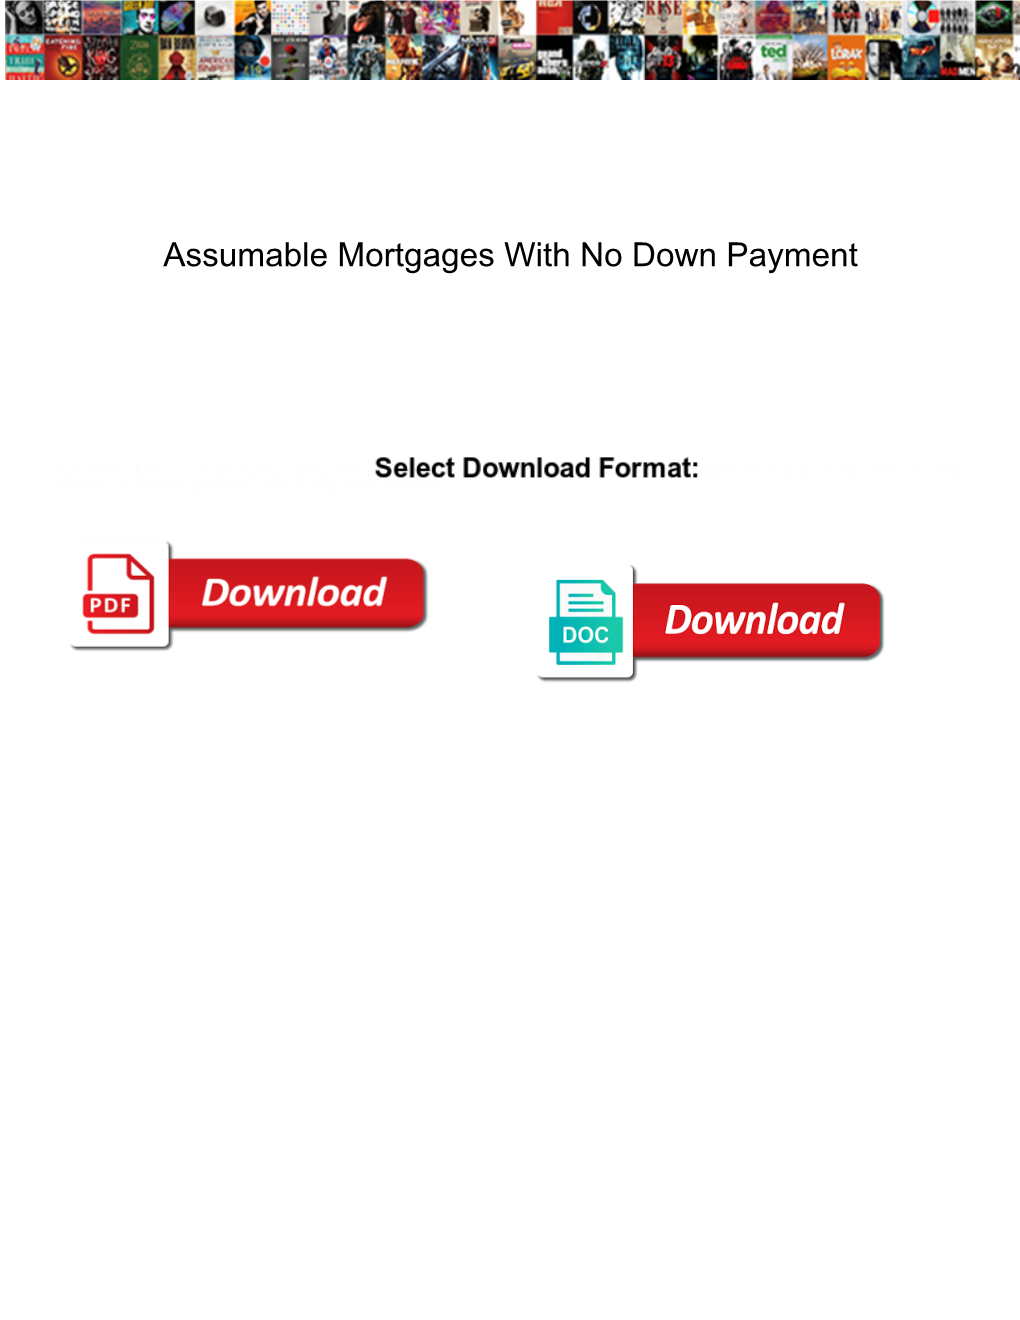 Assumable Mortgages with No Down Payment